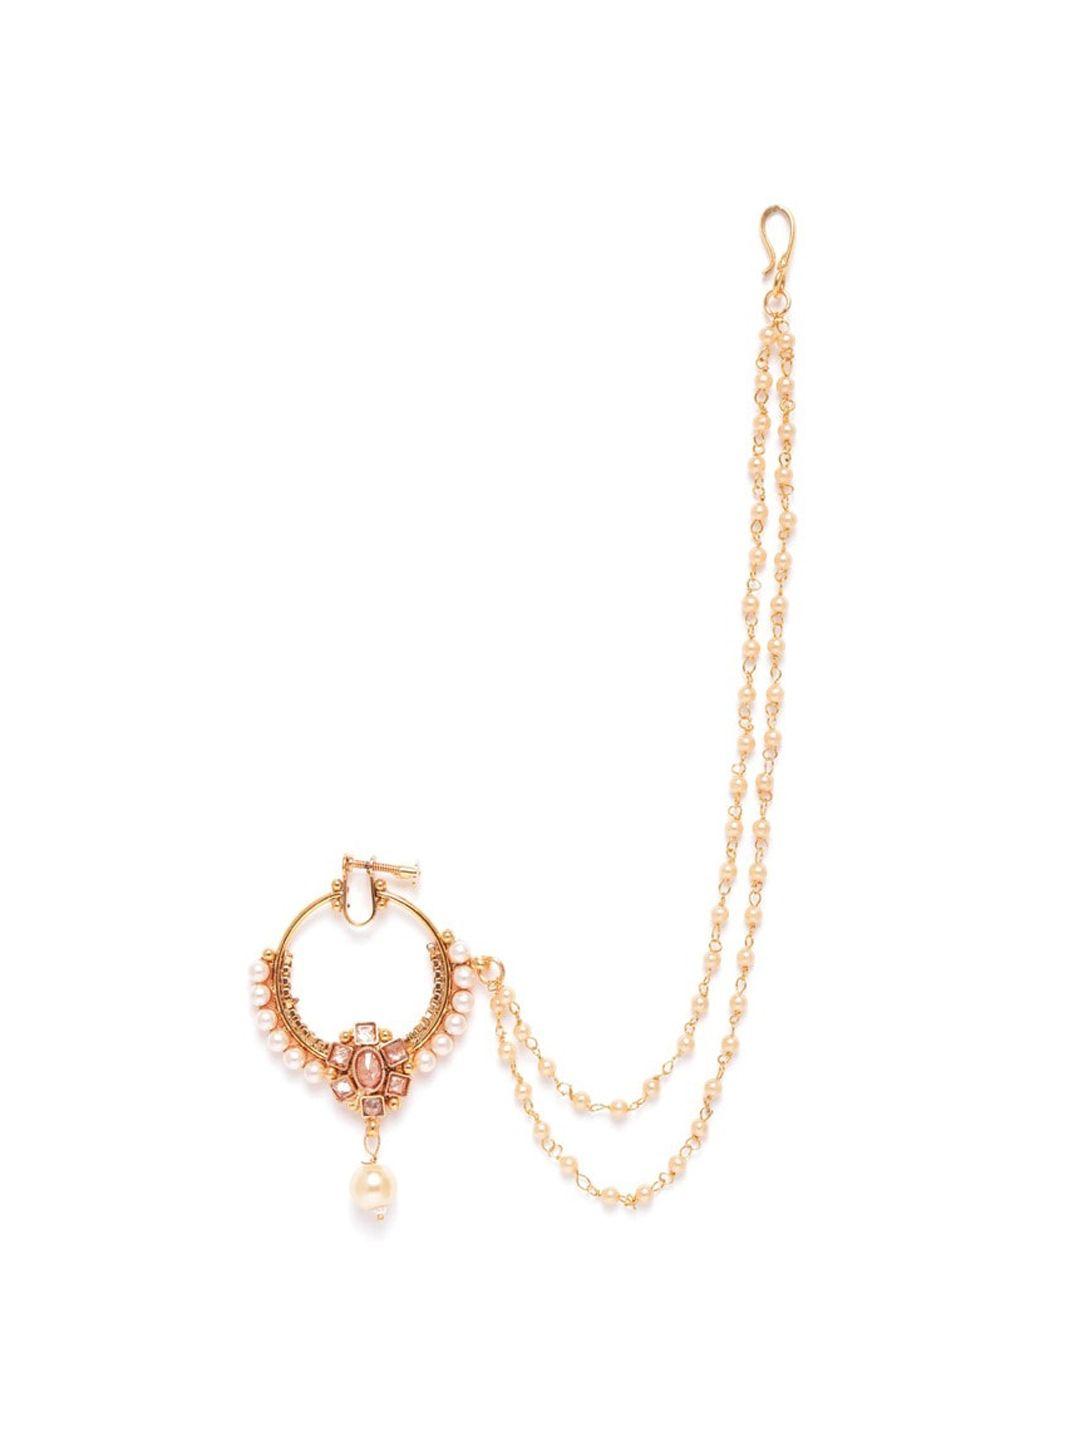 jewels-gehna-gold-plated-cz-stone-studded-pearl-beaded-nose-ring-with-chain